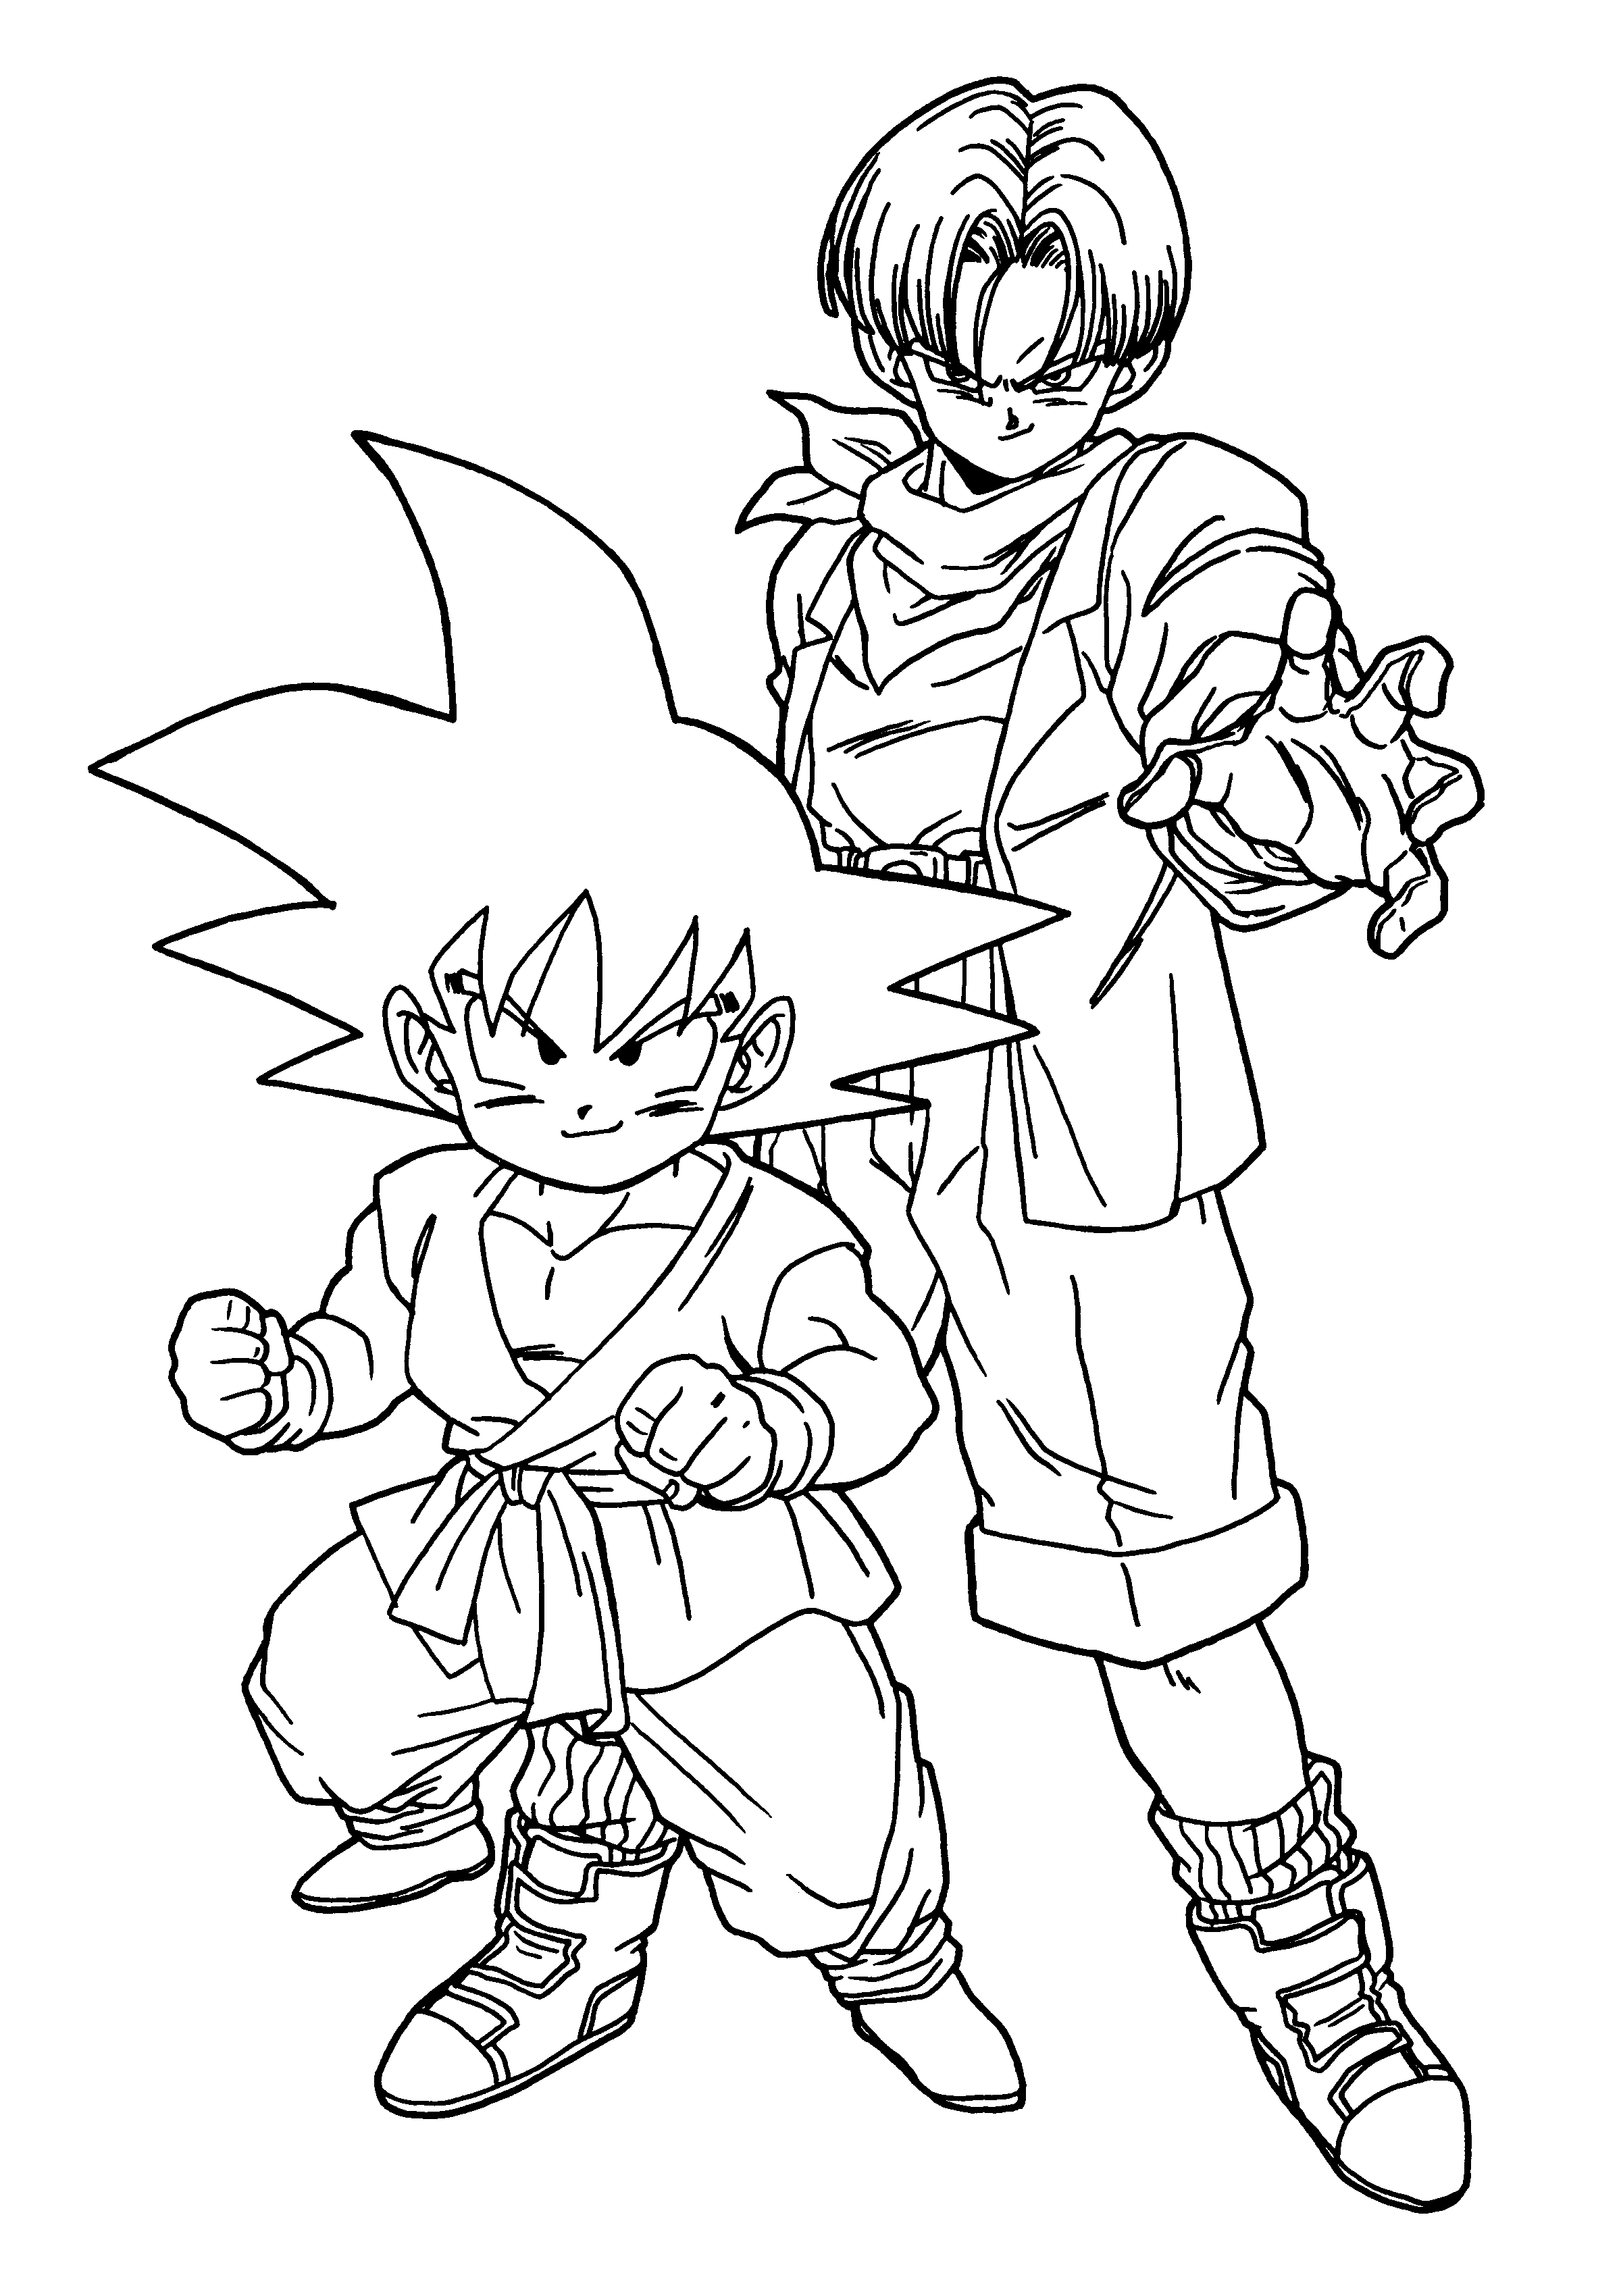  Dragon Ball Z Coloring Pages 6